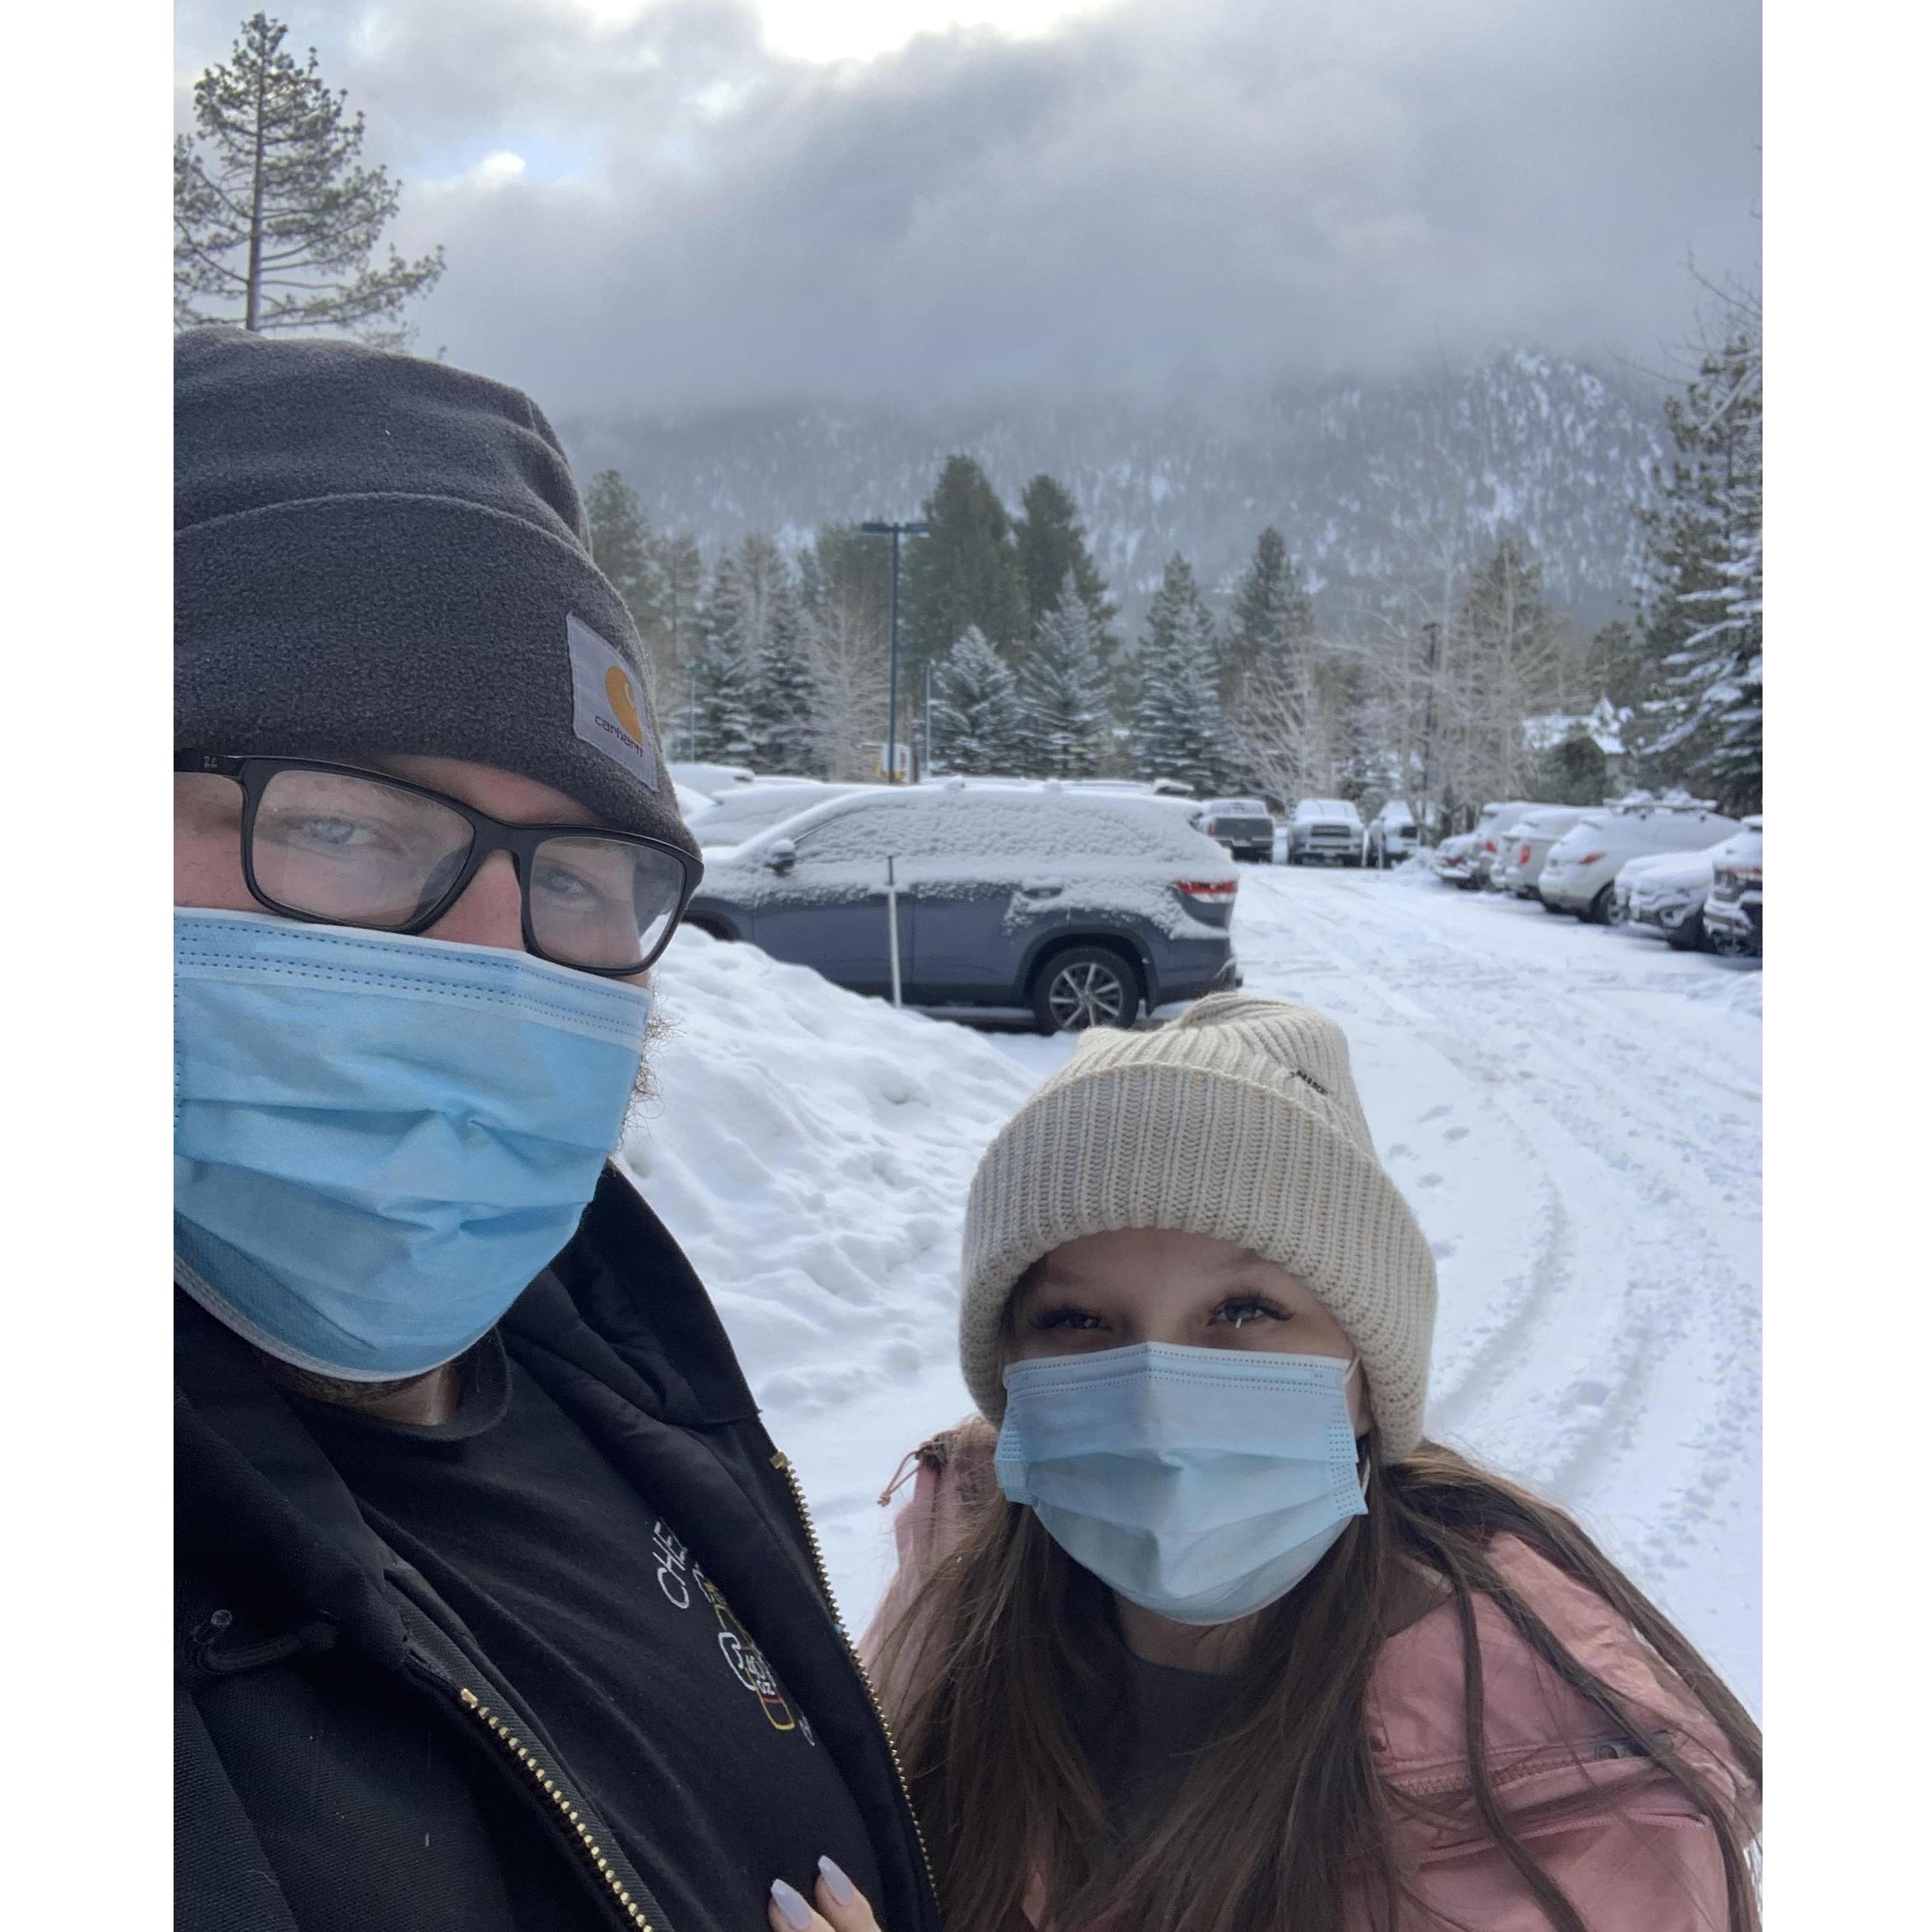 February 14, 2021 - Valentines day in Lake Tahoe